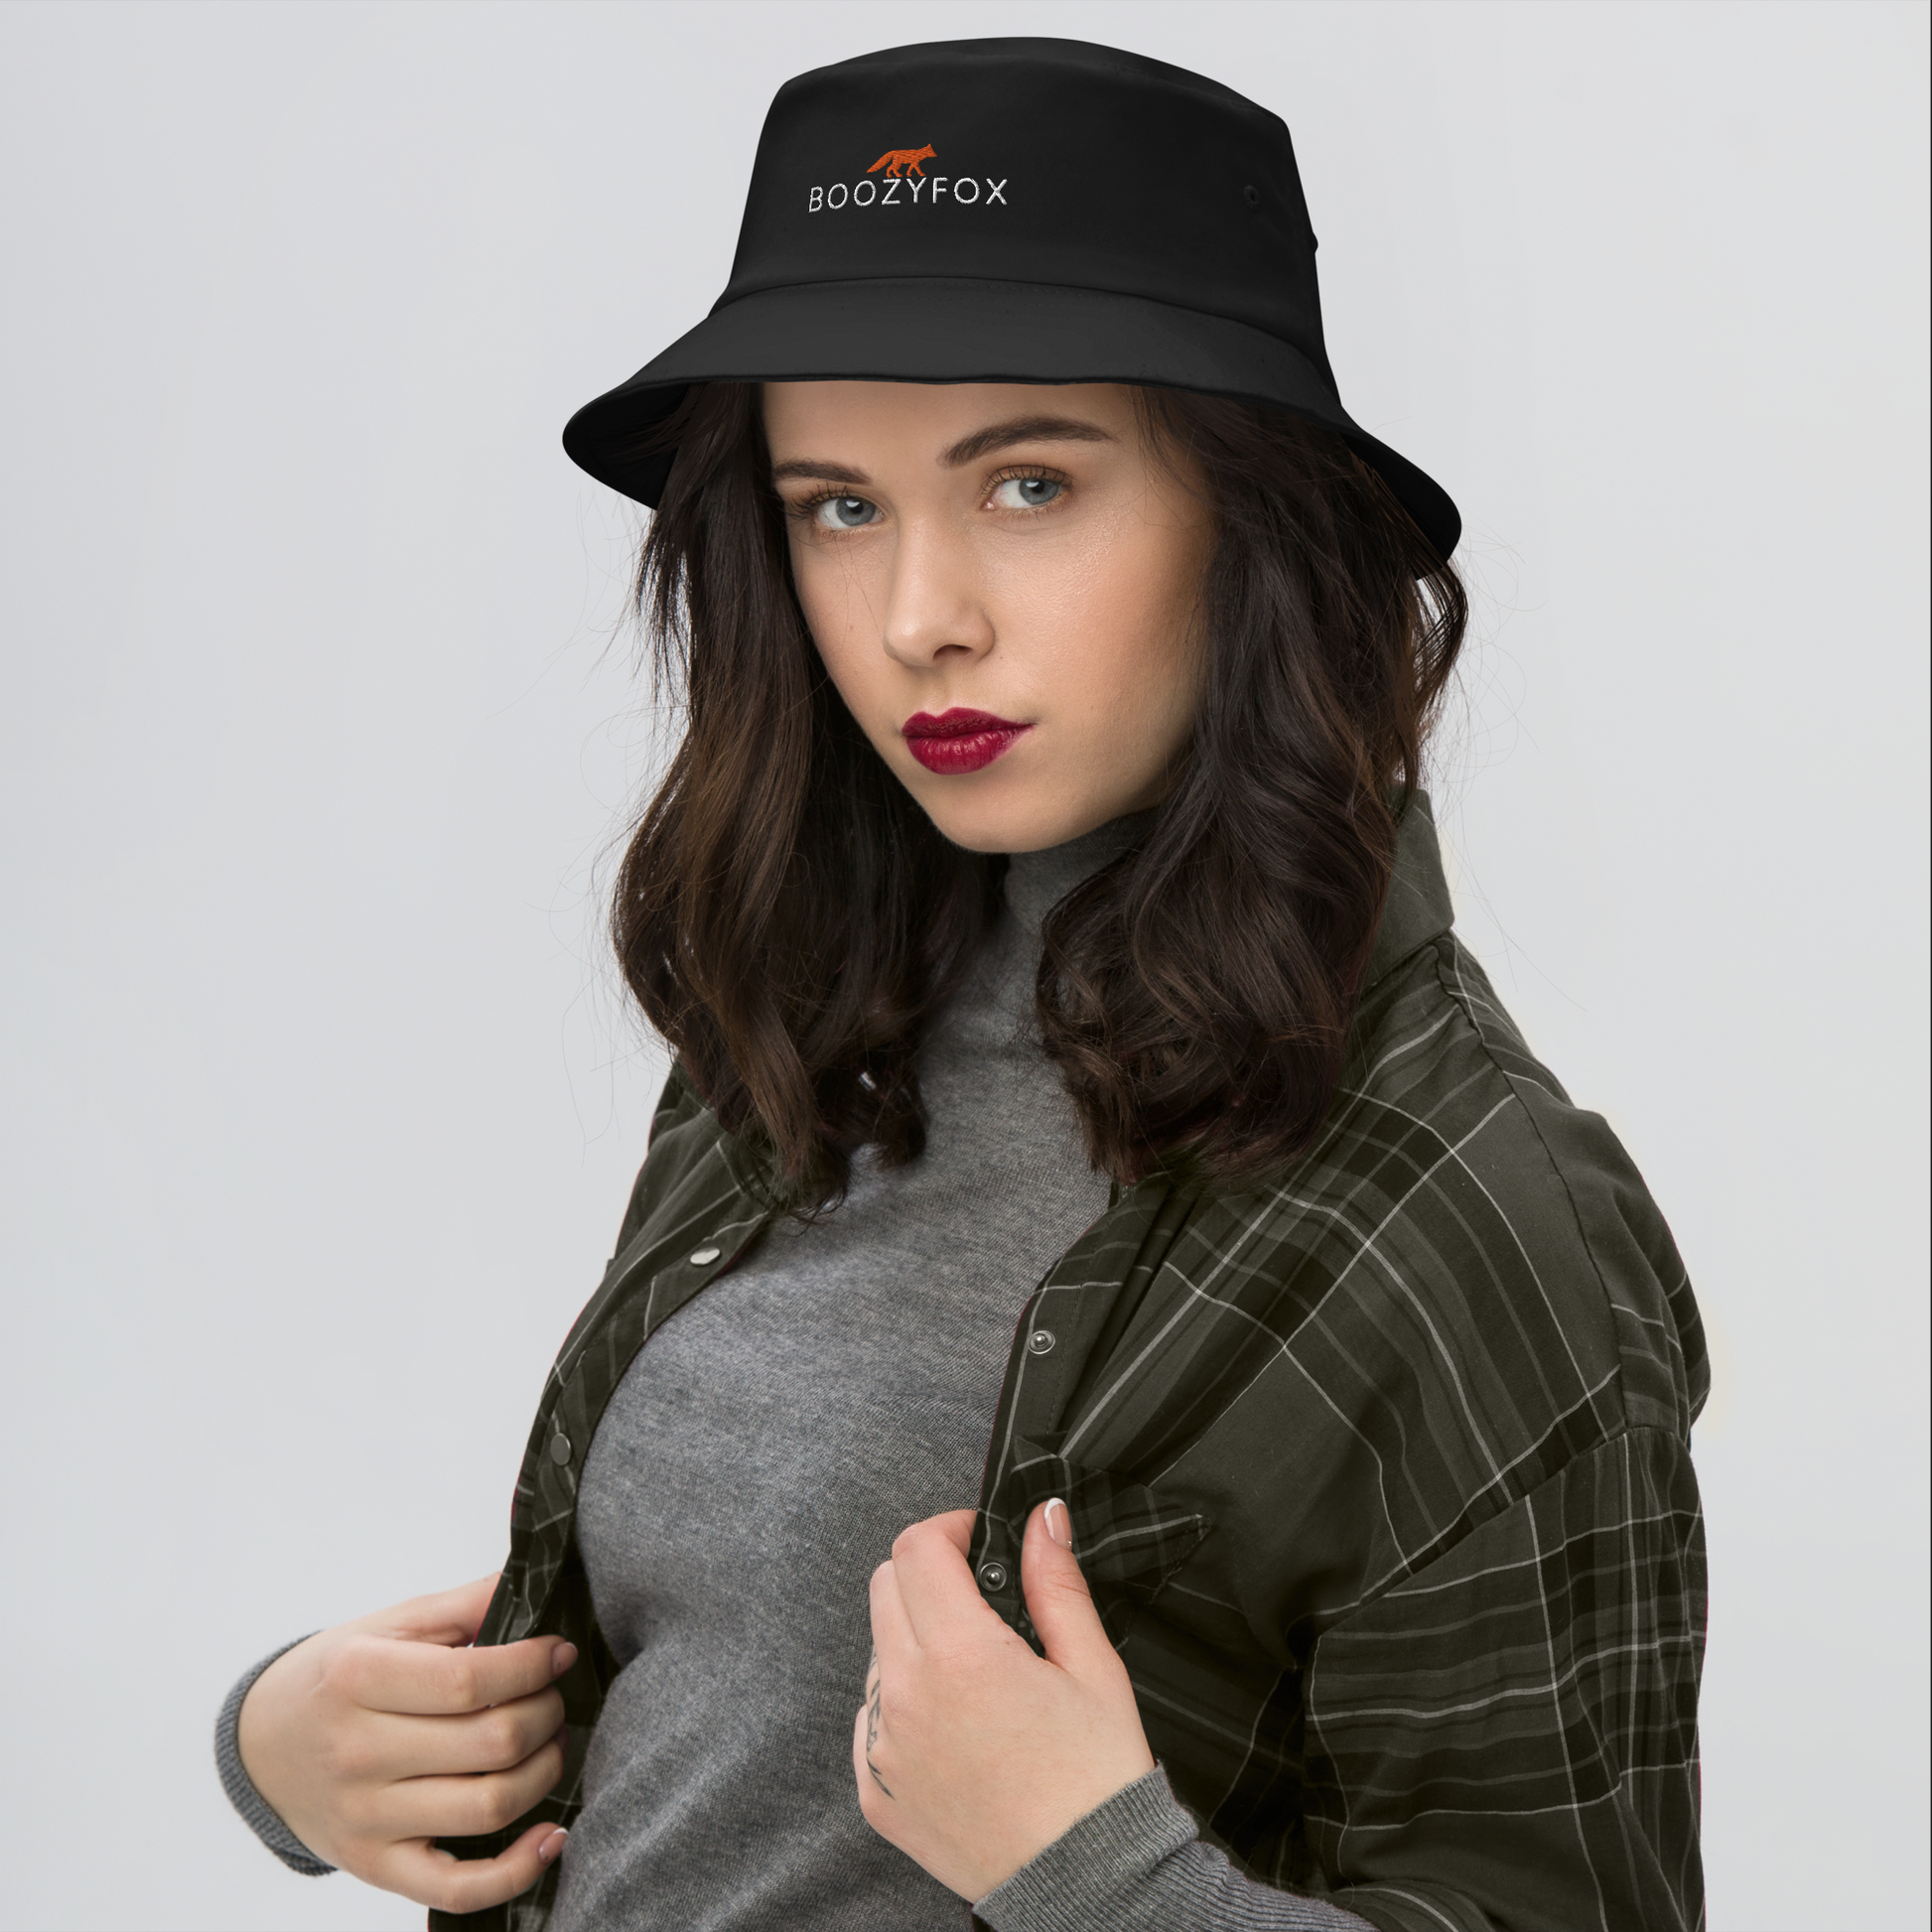 Woman wearing a Cool Black Bucket Hat featuring a striking embroidered Boozy Fox logo on front. Shop Cool Sun Protection Bucket Hats And Wide Brim Hats Online - Boozy Fox